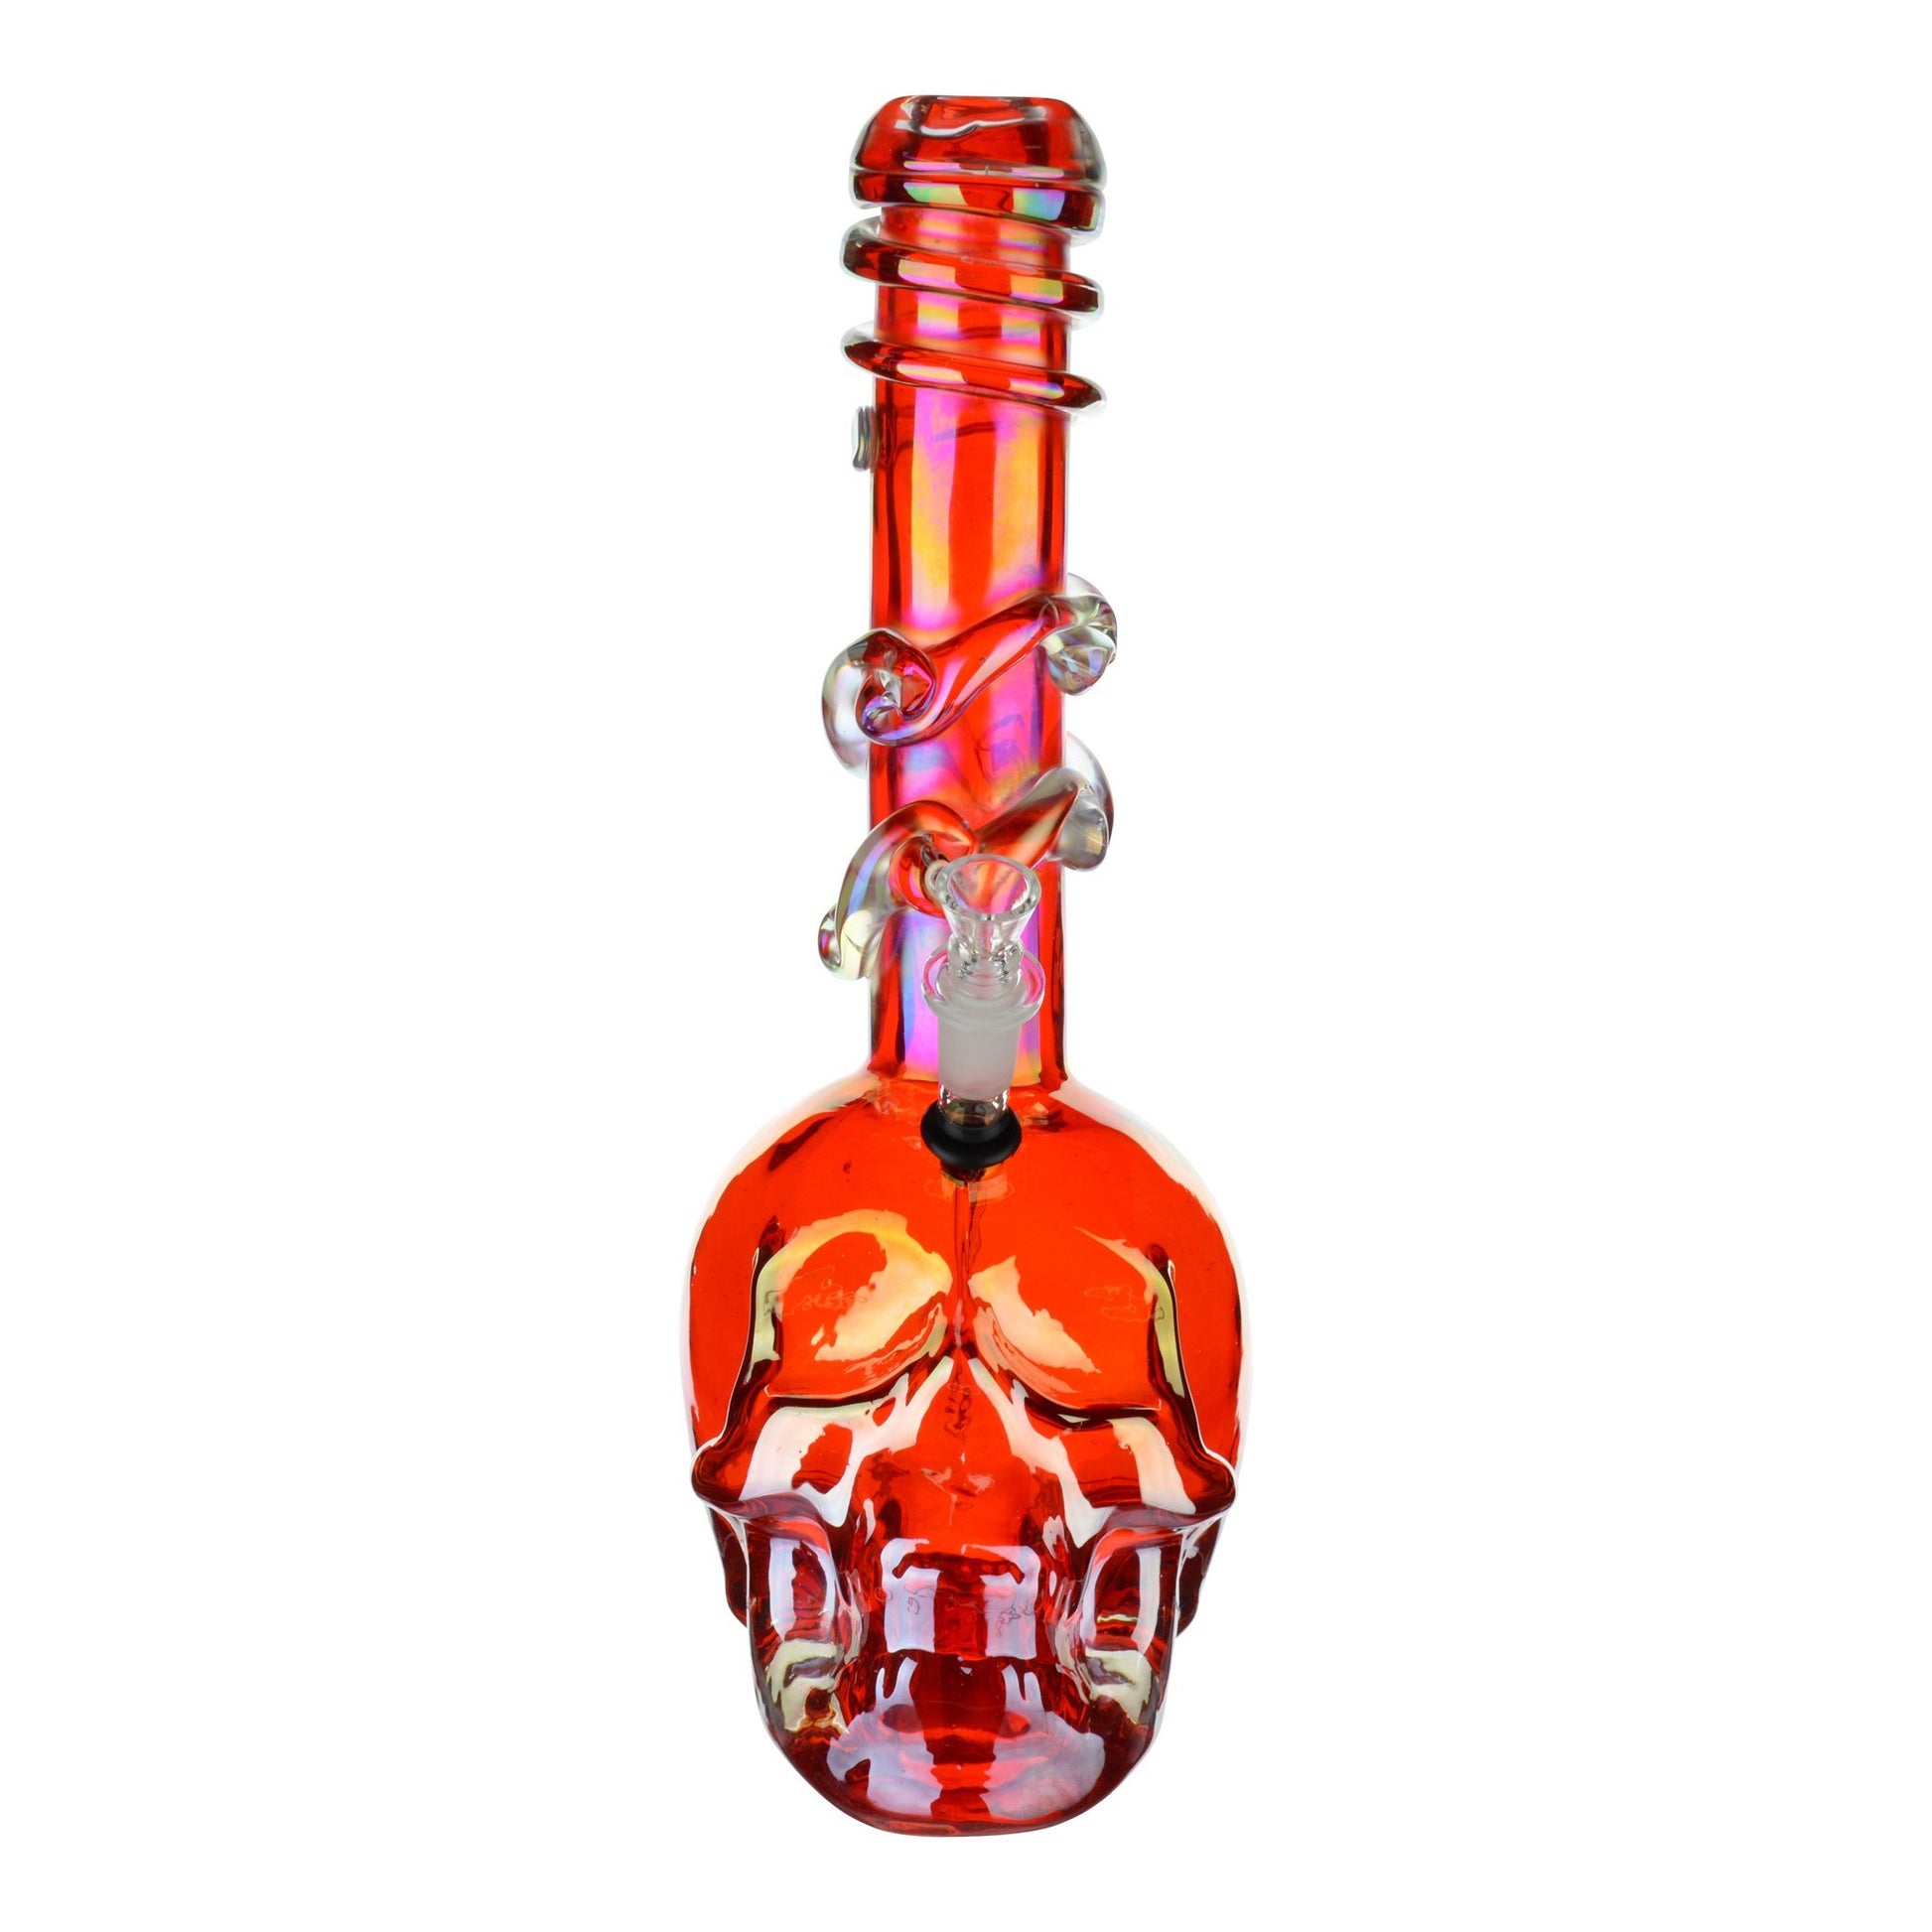 Full front shot of 14-inch iridescent red glass bong spiral mouthpiece skull shaped chamber skull facing front